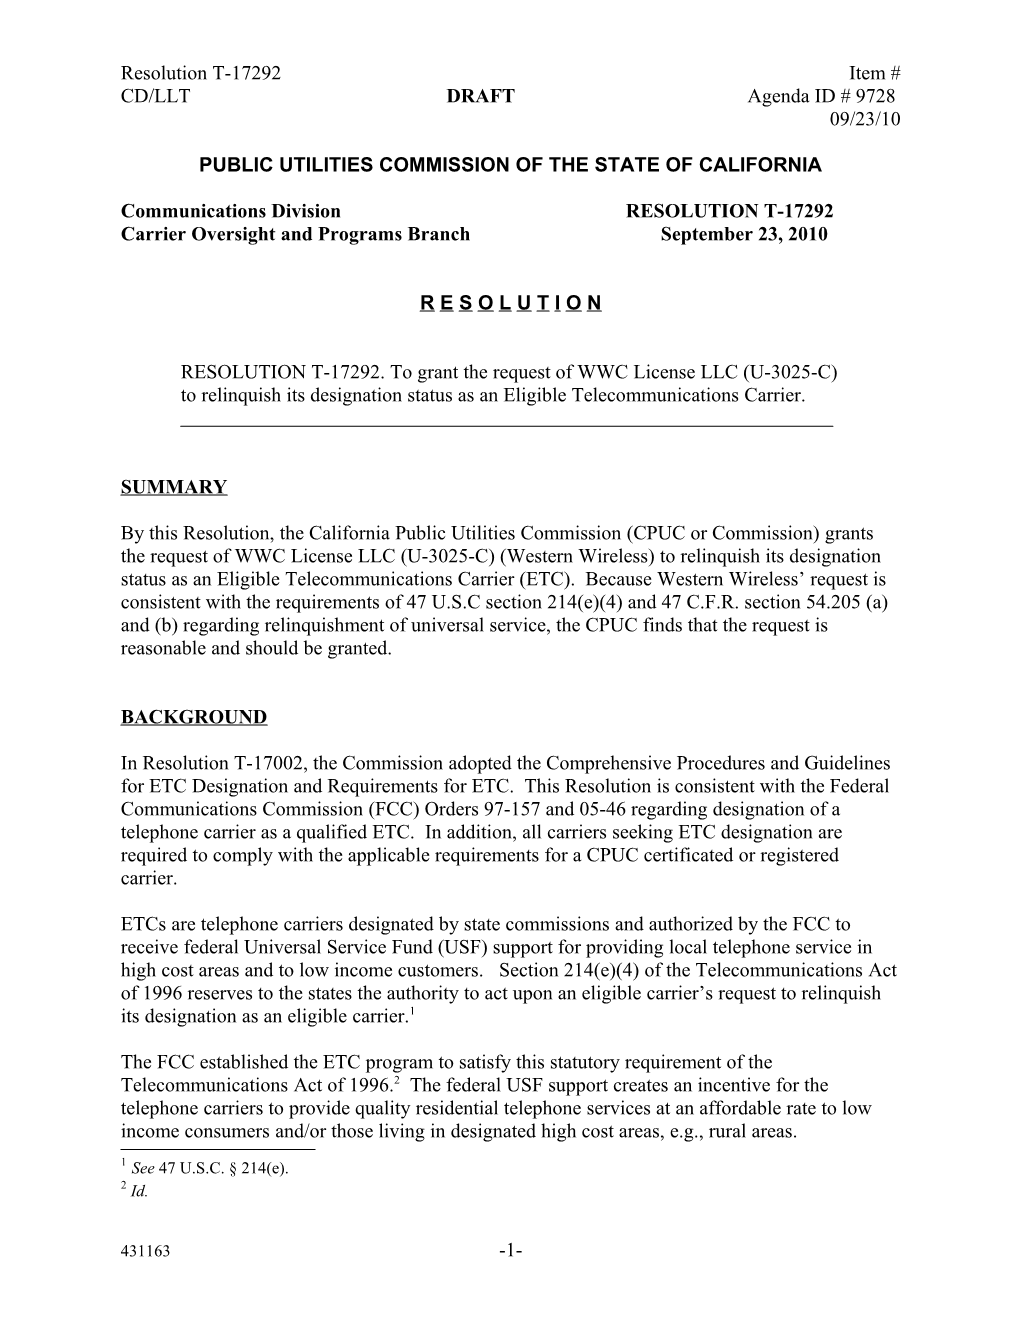 Public Utilities Commission of the State of California s109